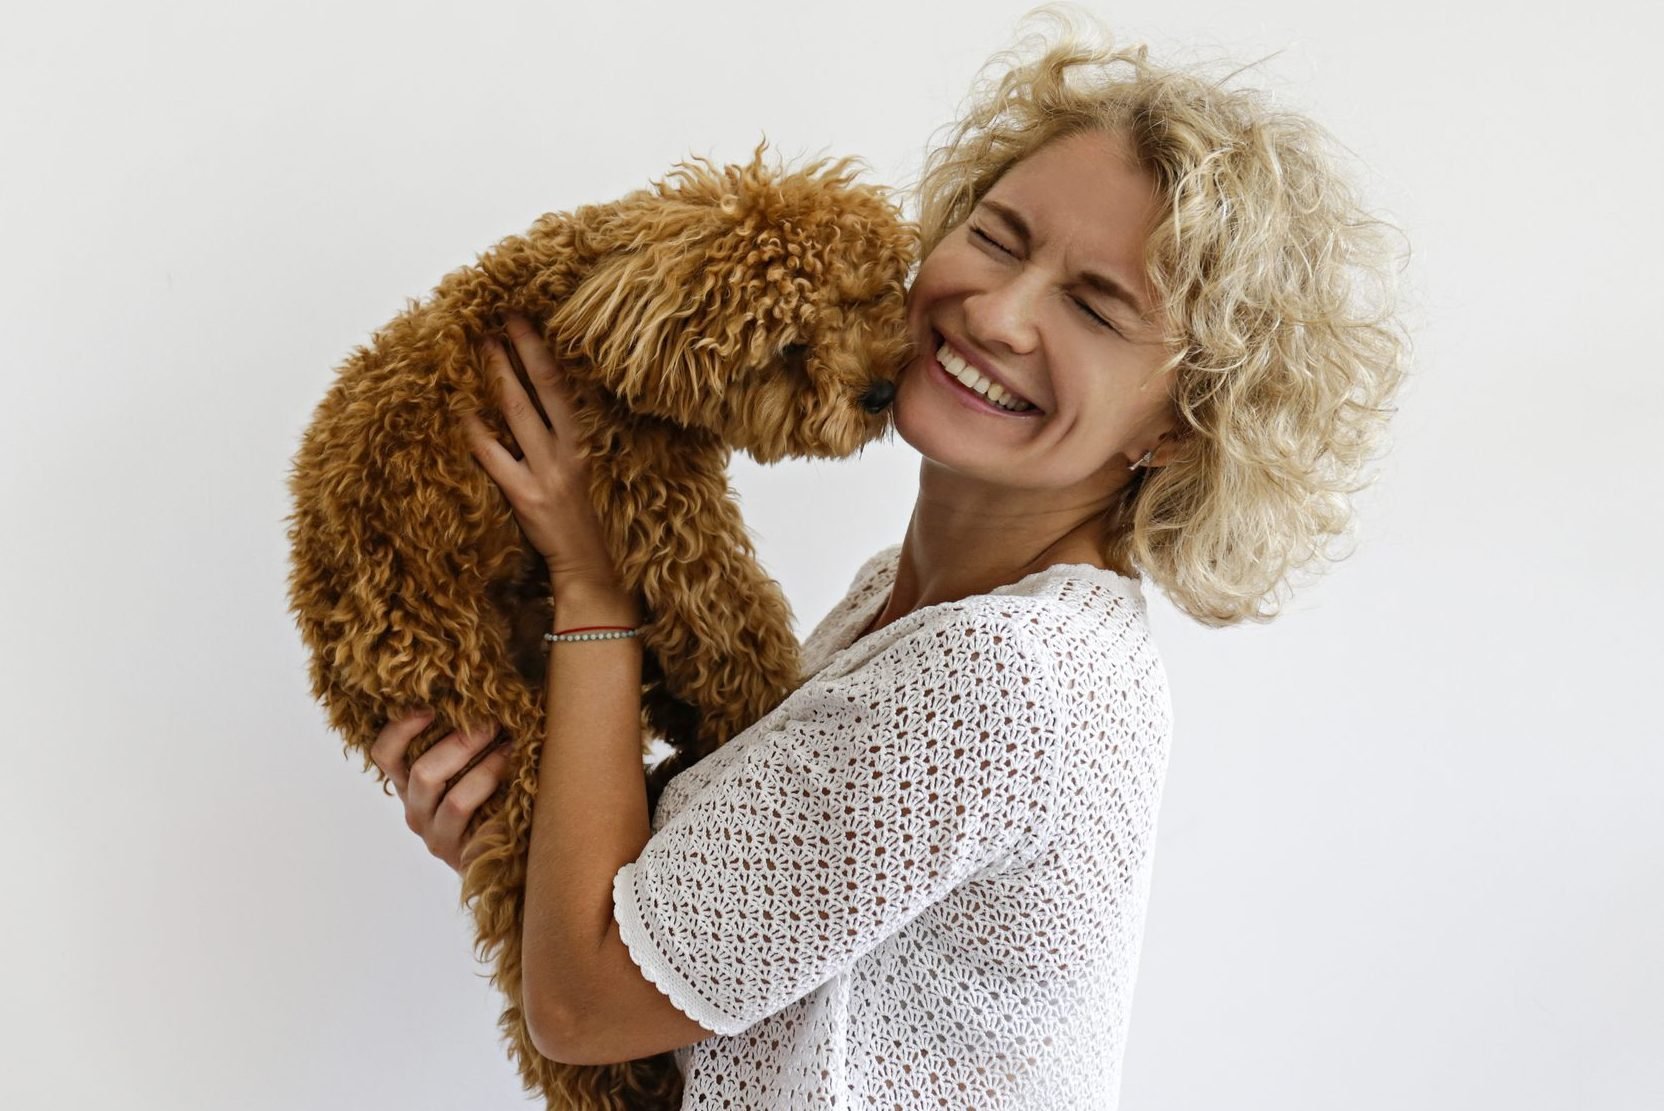 5 of the Most Adorable Goldendoodle Haircuts To Try On Your Curly-Haired  Cutie